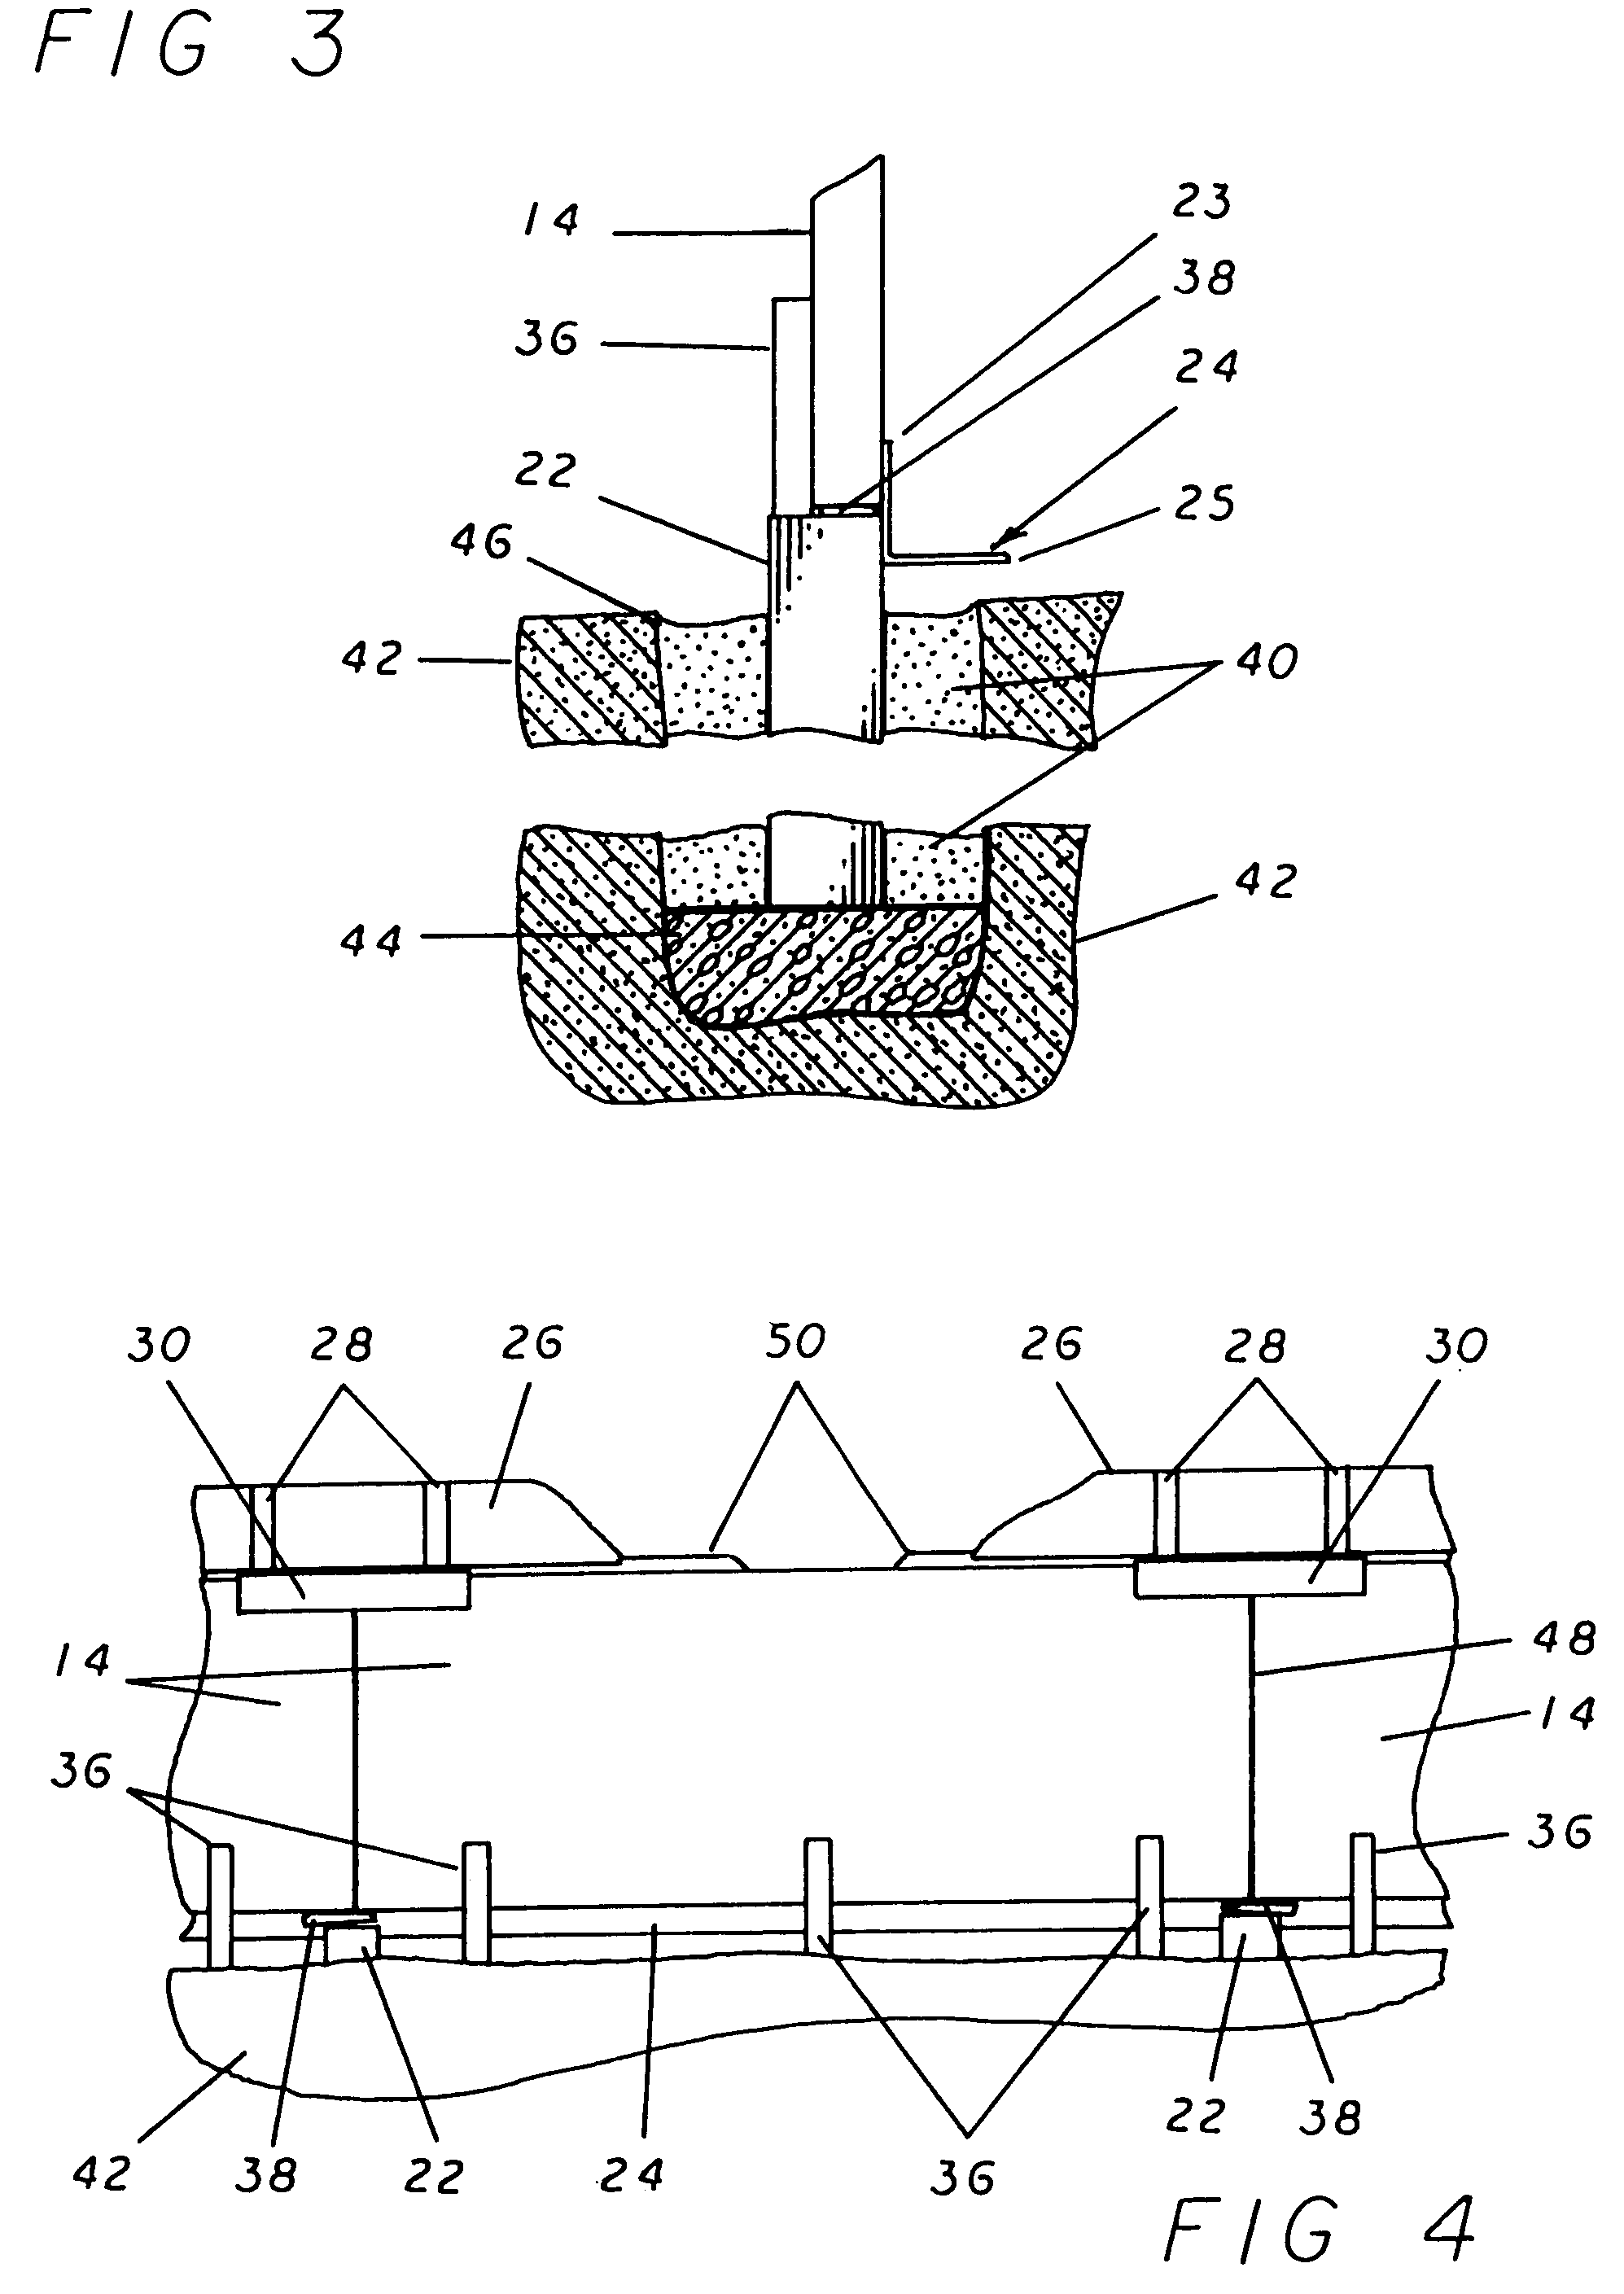 Foundation system for prefabricated houses